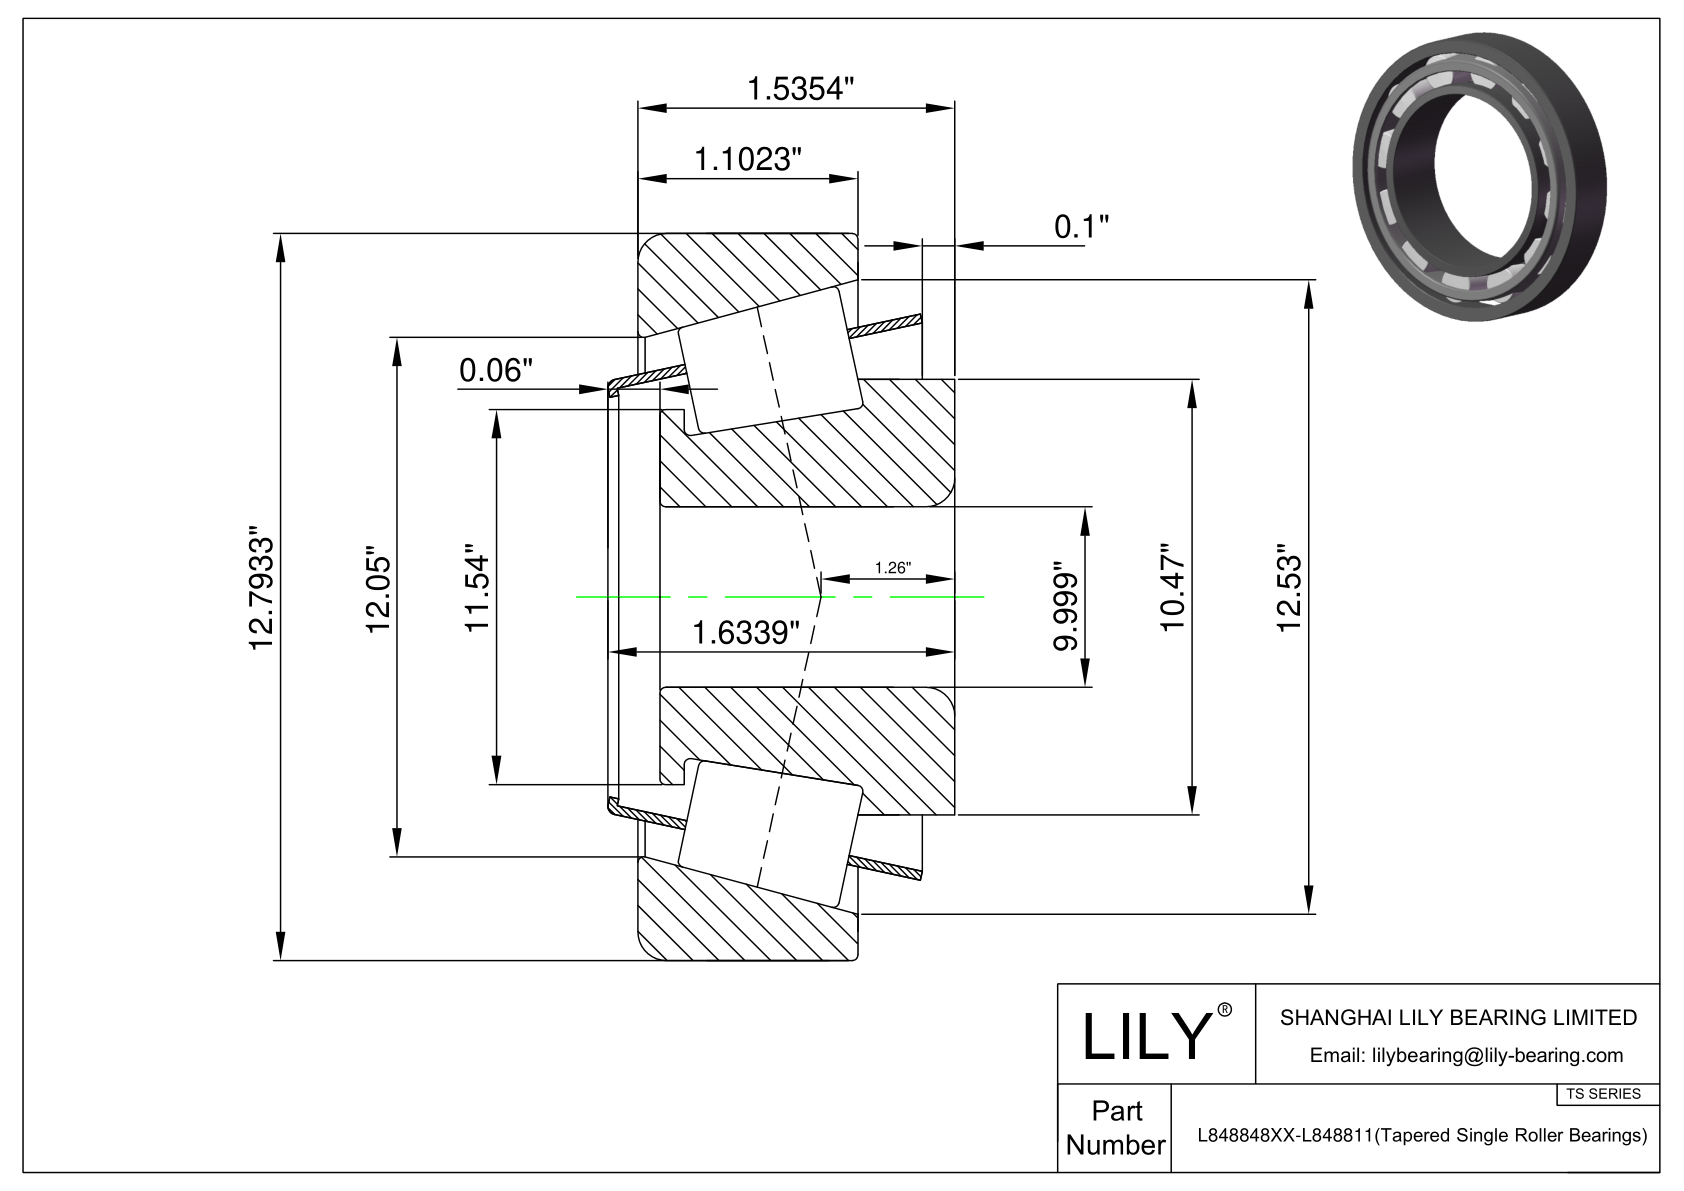 L848848XX-L848811 TS (Tapered Single Roller Bearings) (Imperial) cad drawing